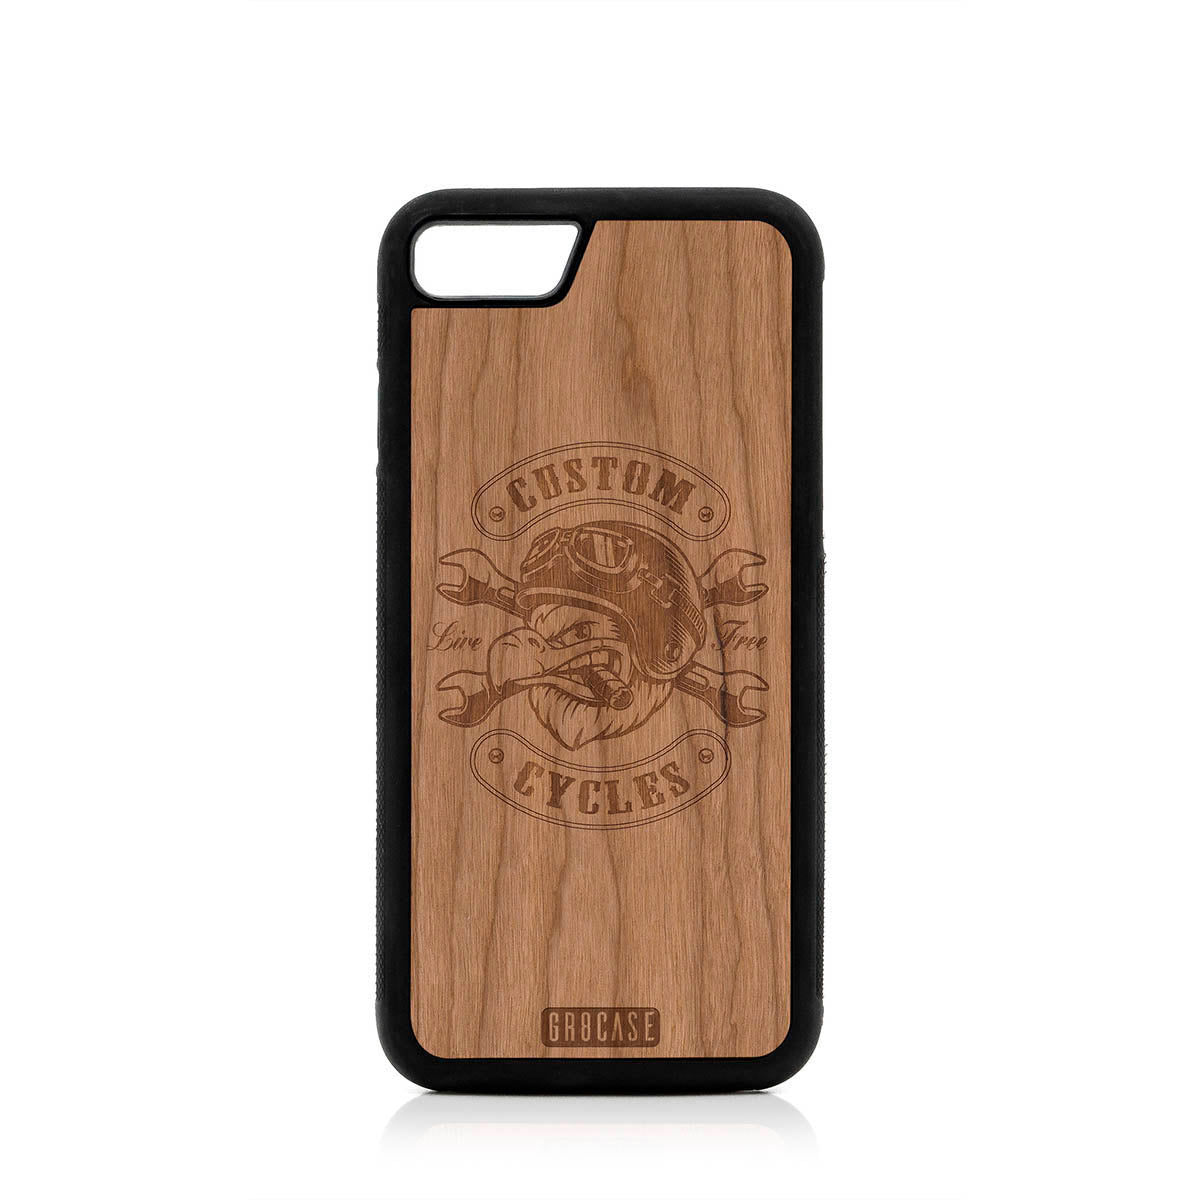 Custom Cycles Live Free (Biker Eagle) Design Wood Case For iPhone 7/8 by GR8CASE